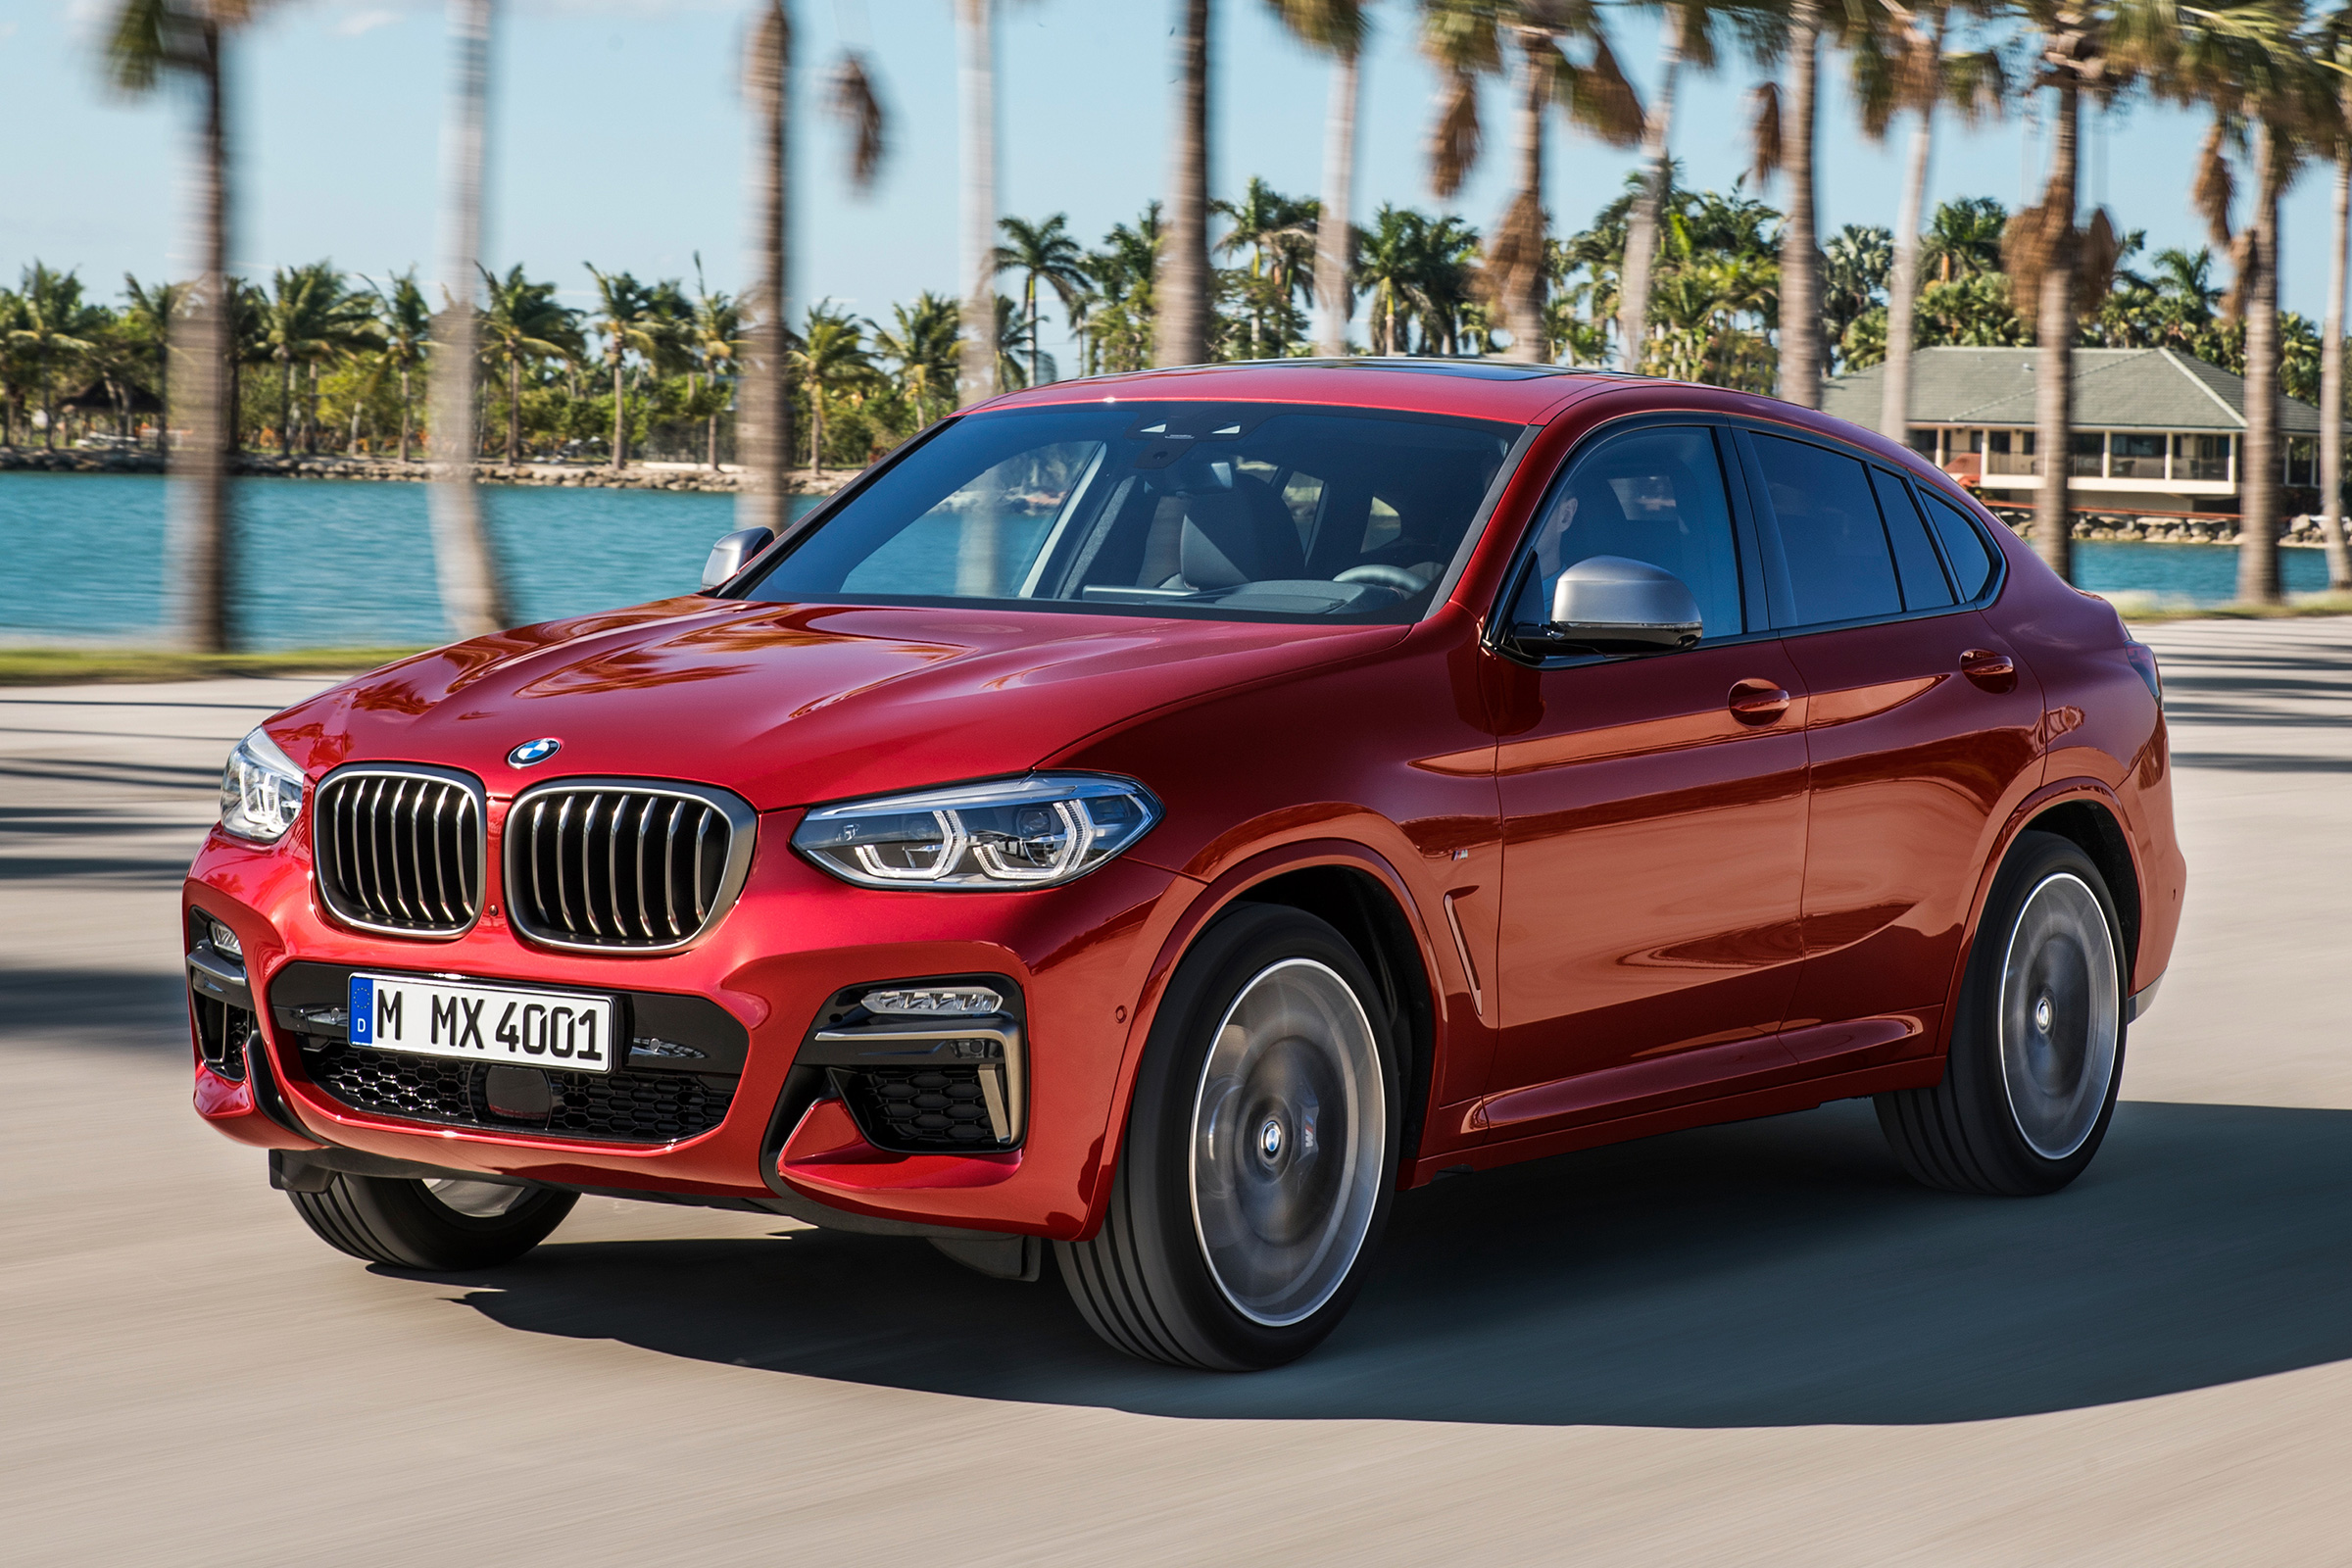 BMW X4 M – Upclose with the new 2019 model